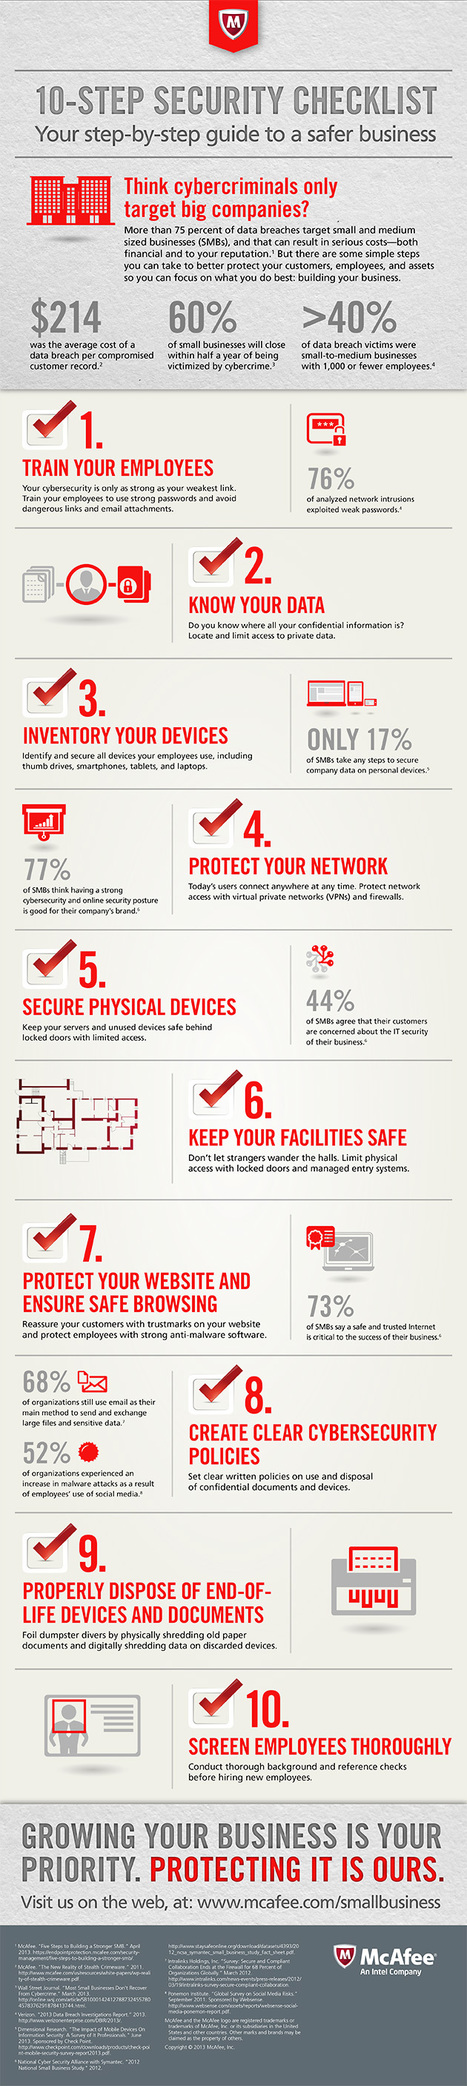 How to keep your business safe – the one checklist all SMBs should have [Infographic] | 21st Century Learning and Teaching | Scoop.it